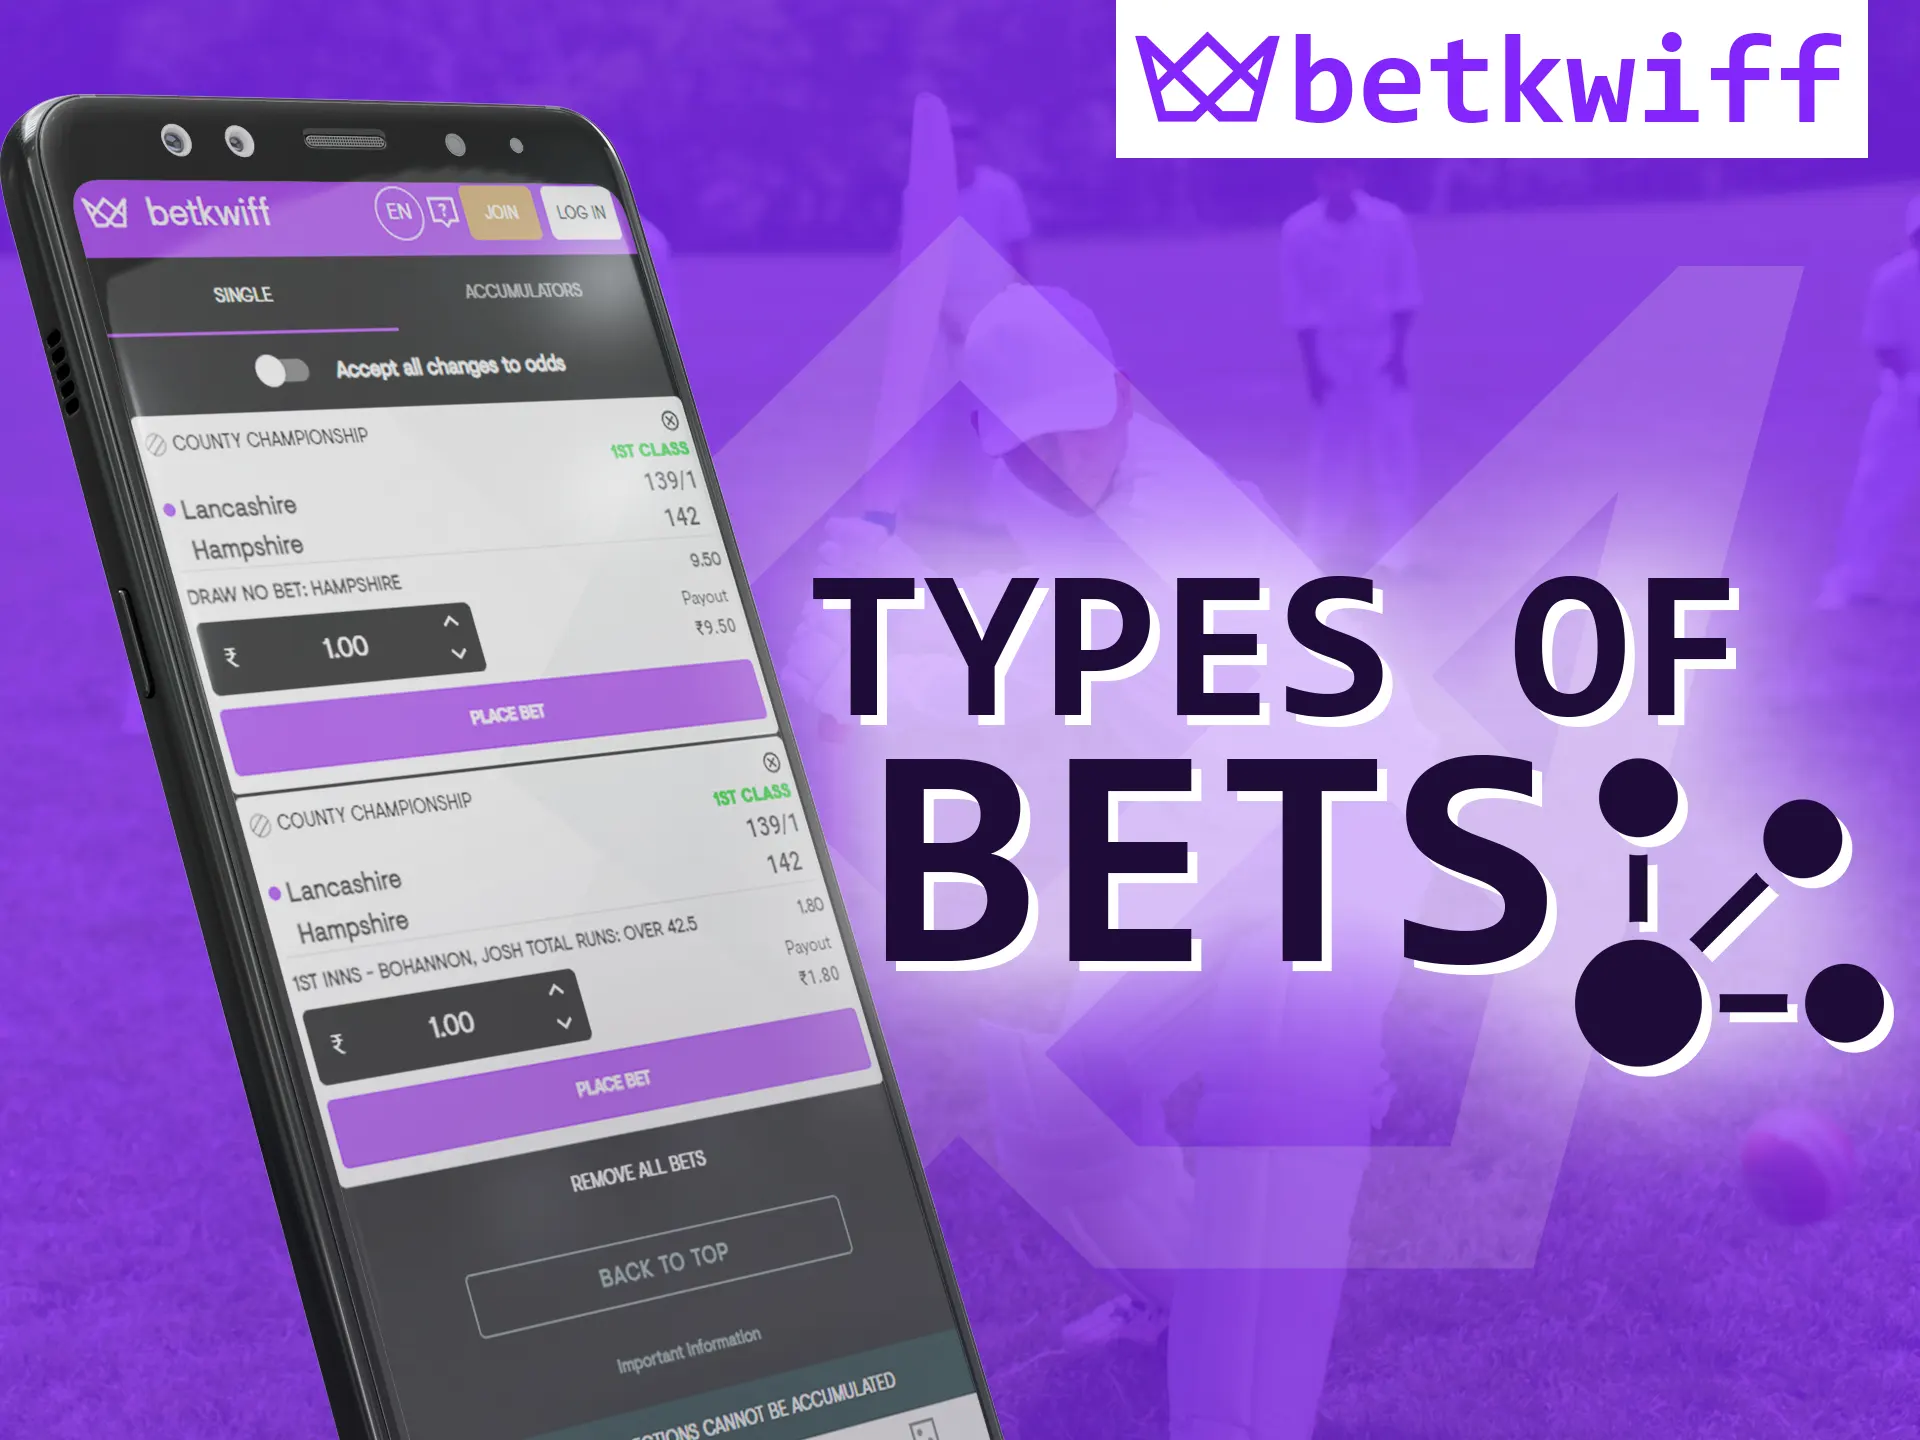 In the Betkwiff app, there are different types of bets available to you.